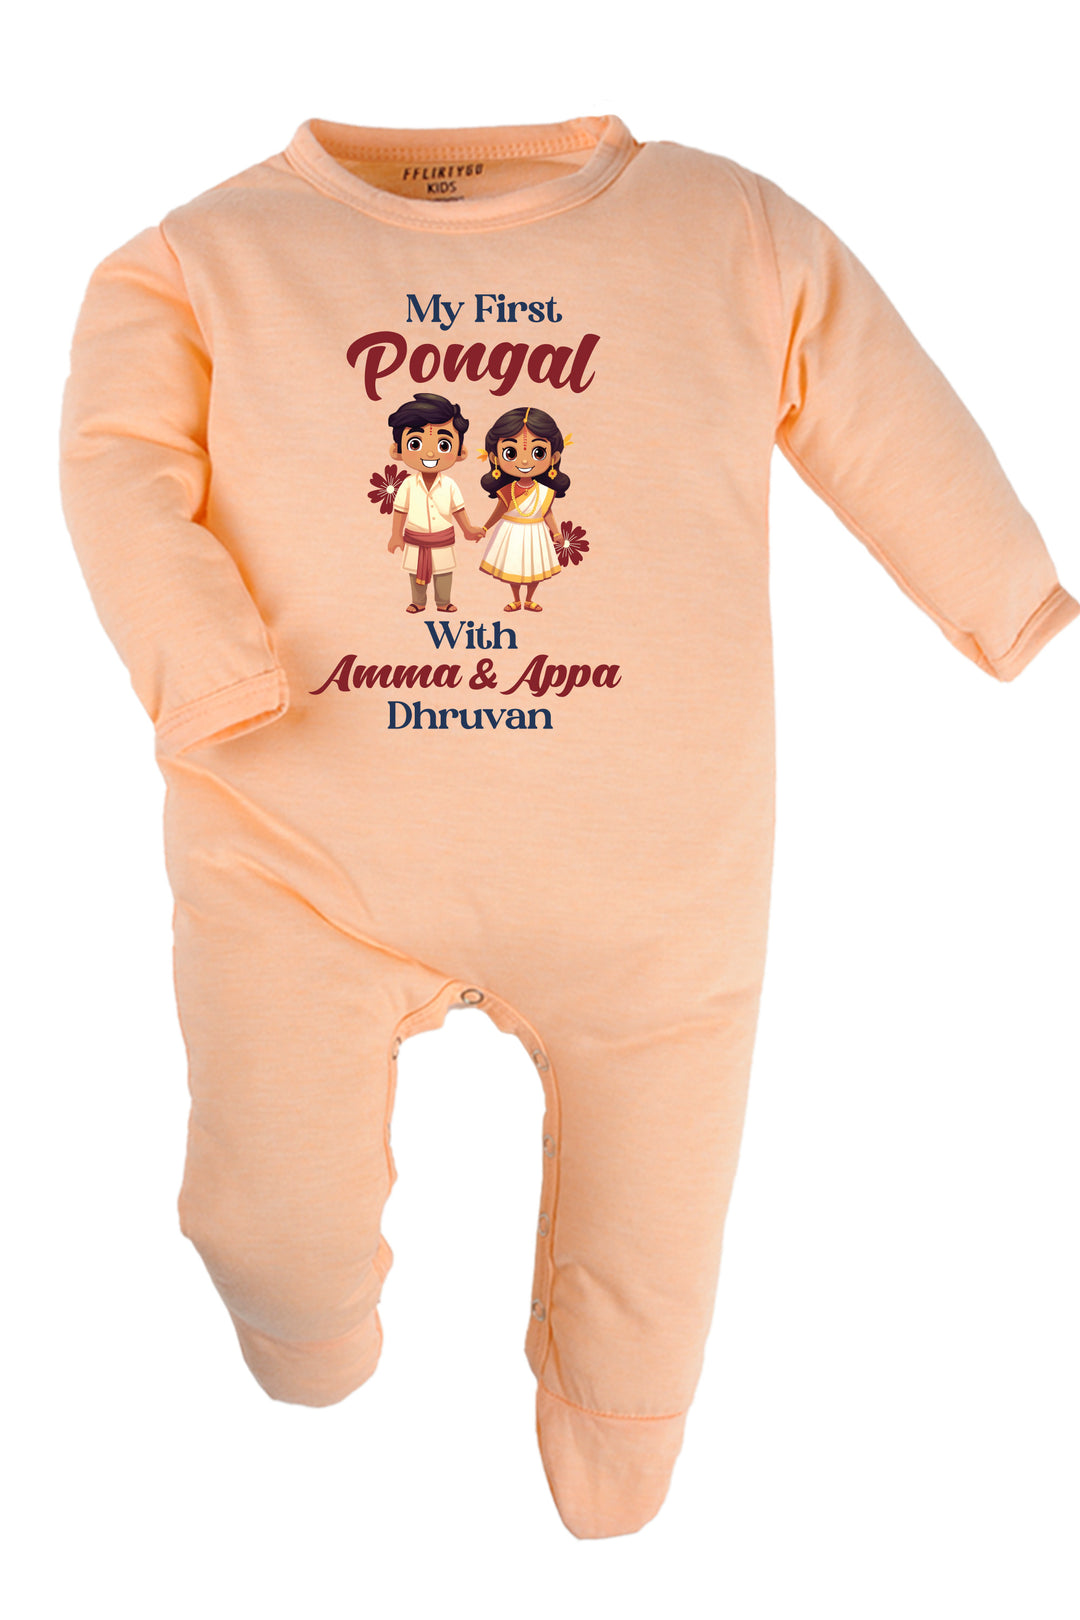 My First Pongal With Amma & Appa Baby Romper | Onesies w/ Custom Name